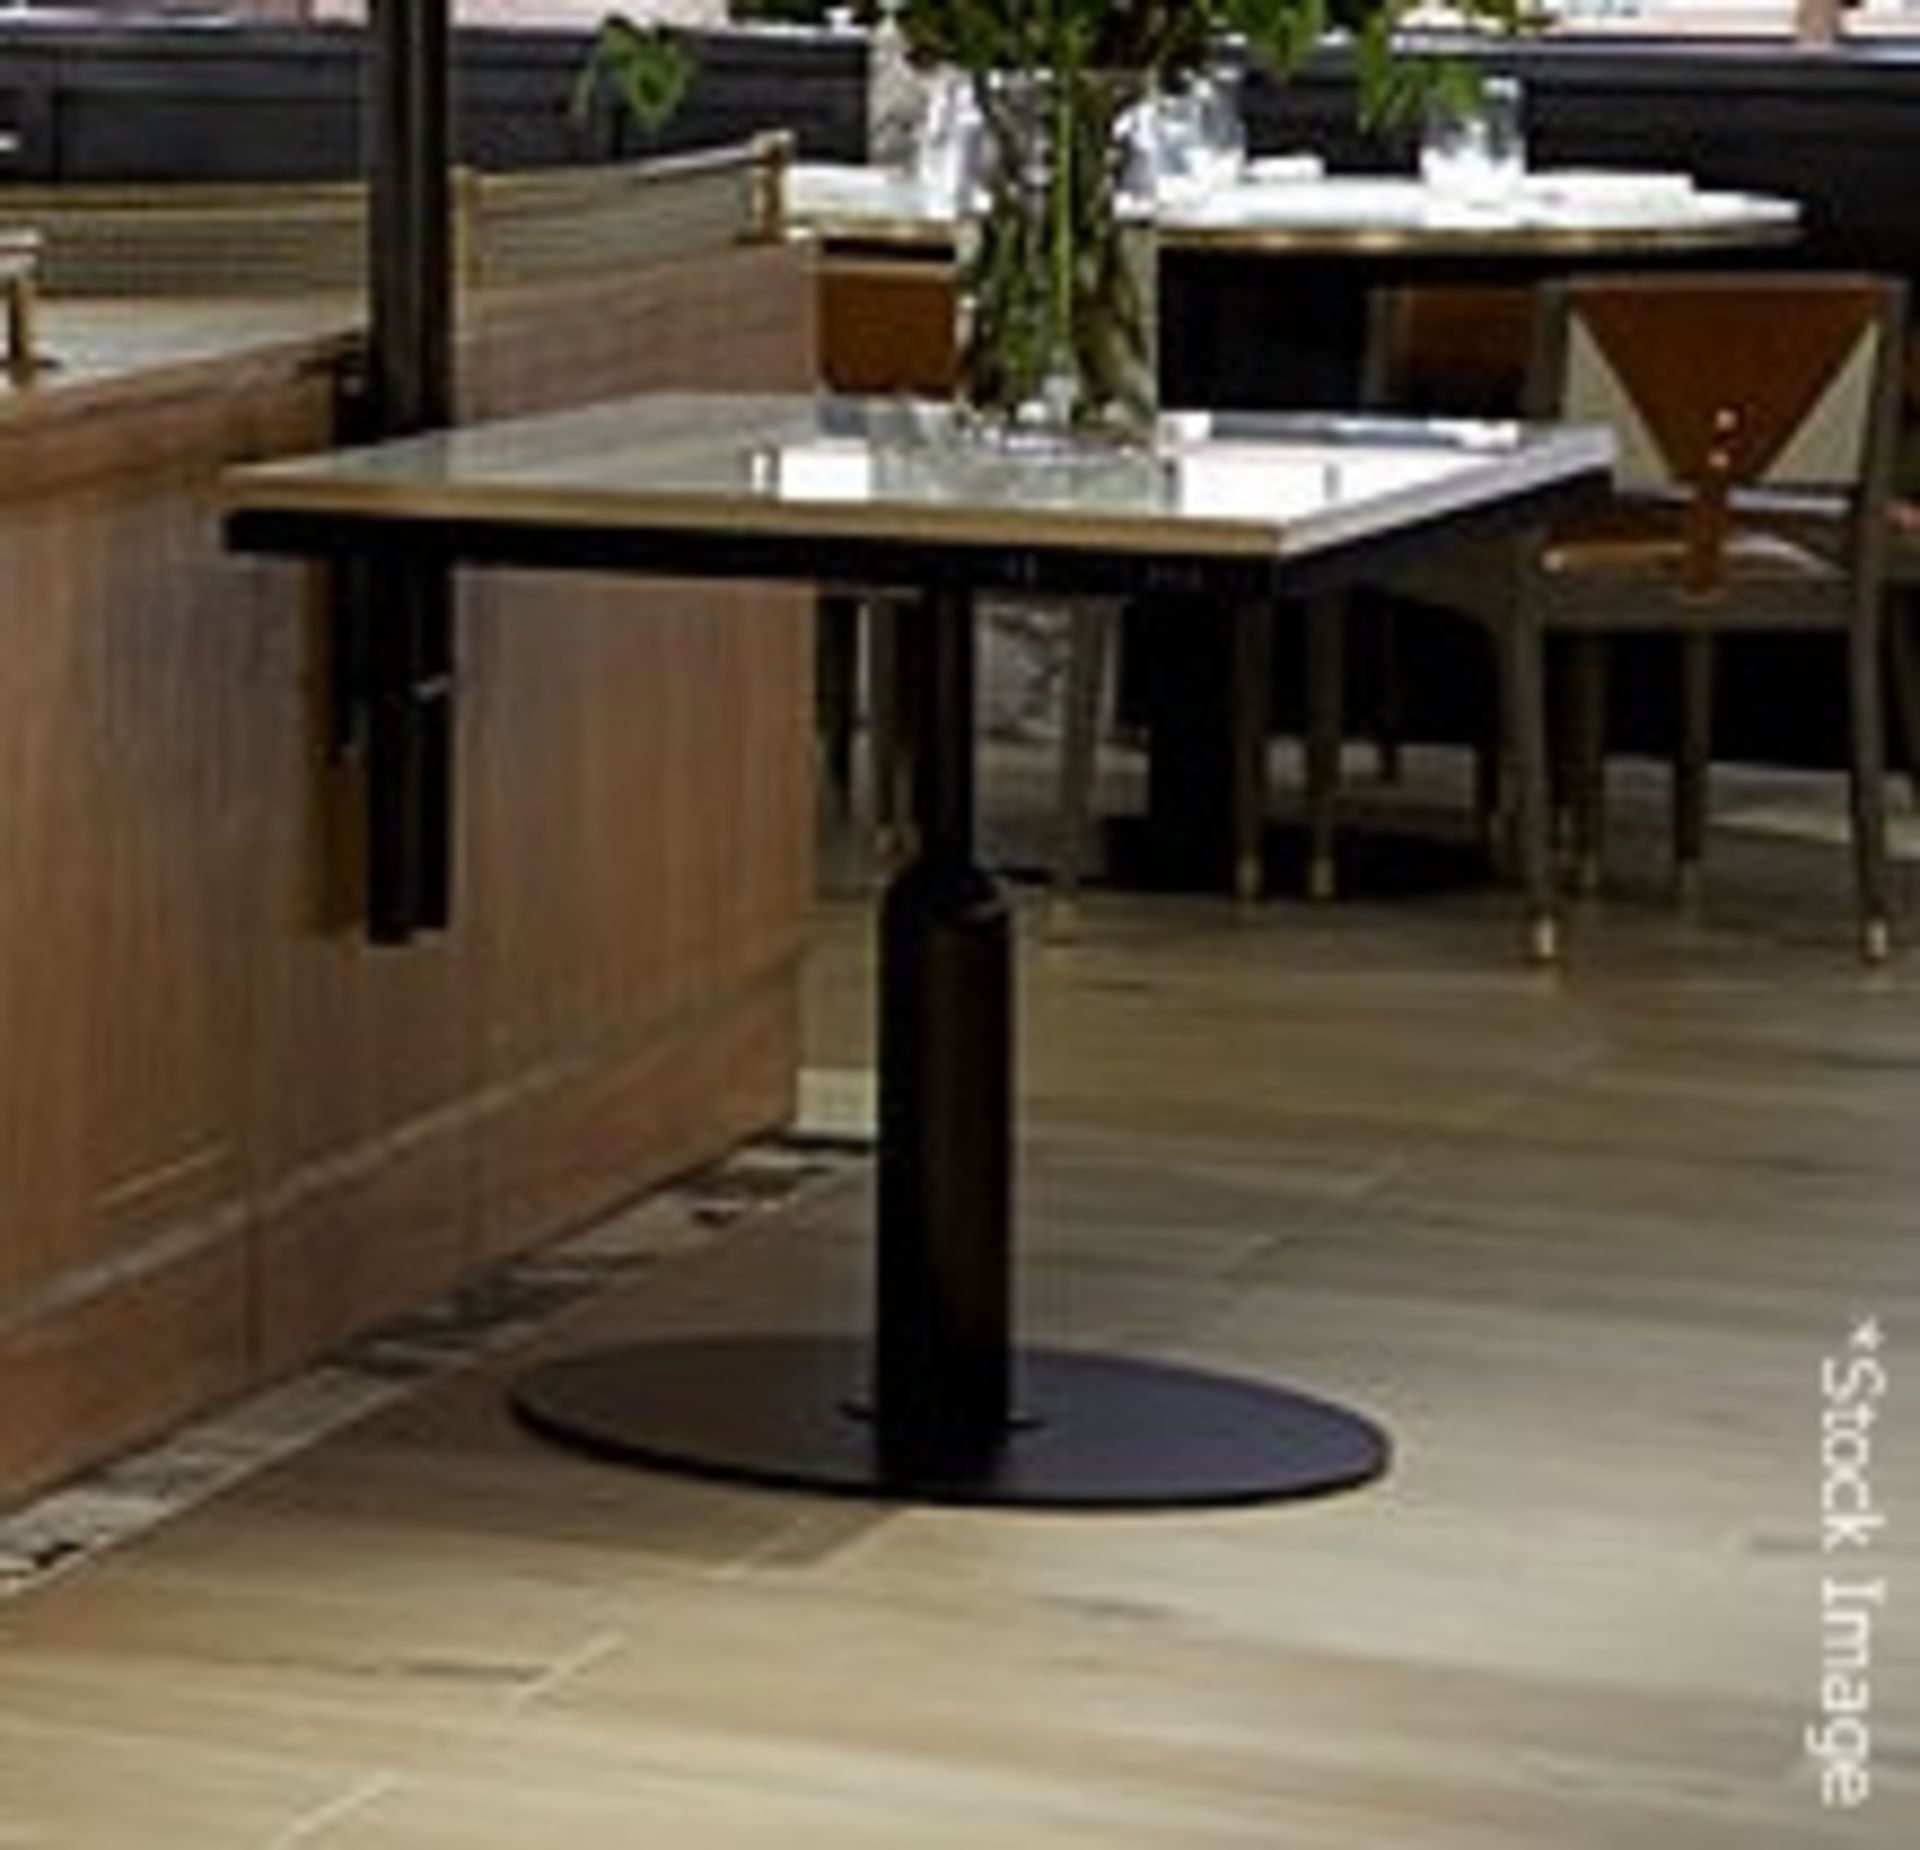 1 x Specially Commissioned Industrial-Style Marble-Topped Square Bistro Table With A Brass Trim - - Image 3 of 5